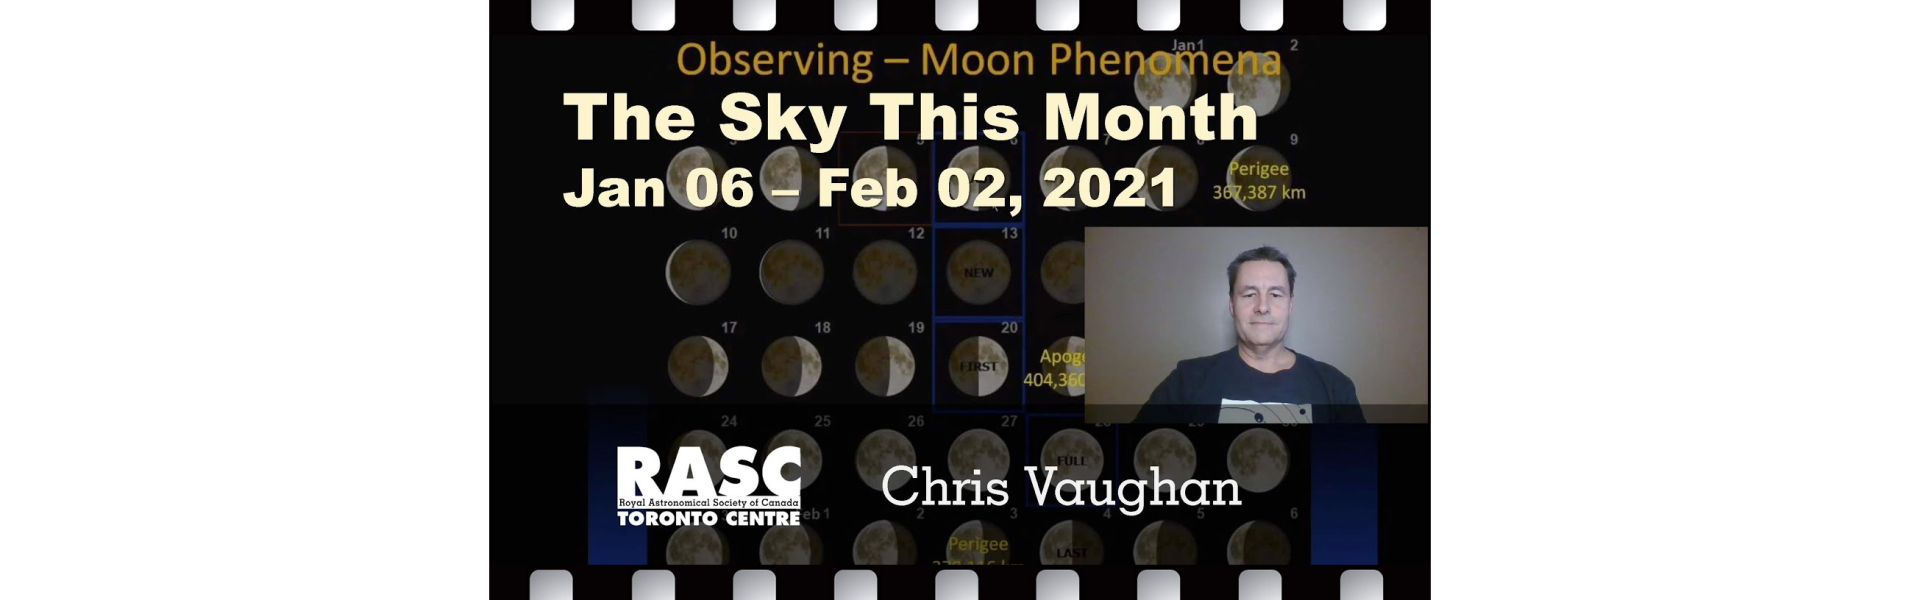 The Sky This Month for January 6, 2021 to February 2, 2021